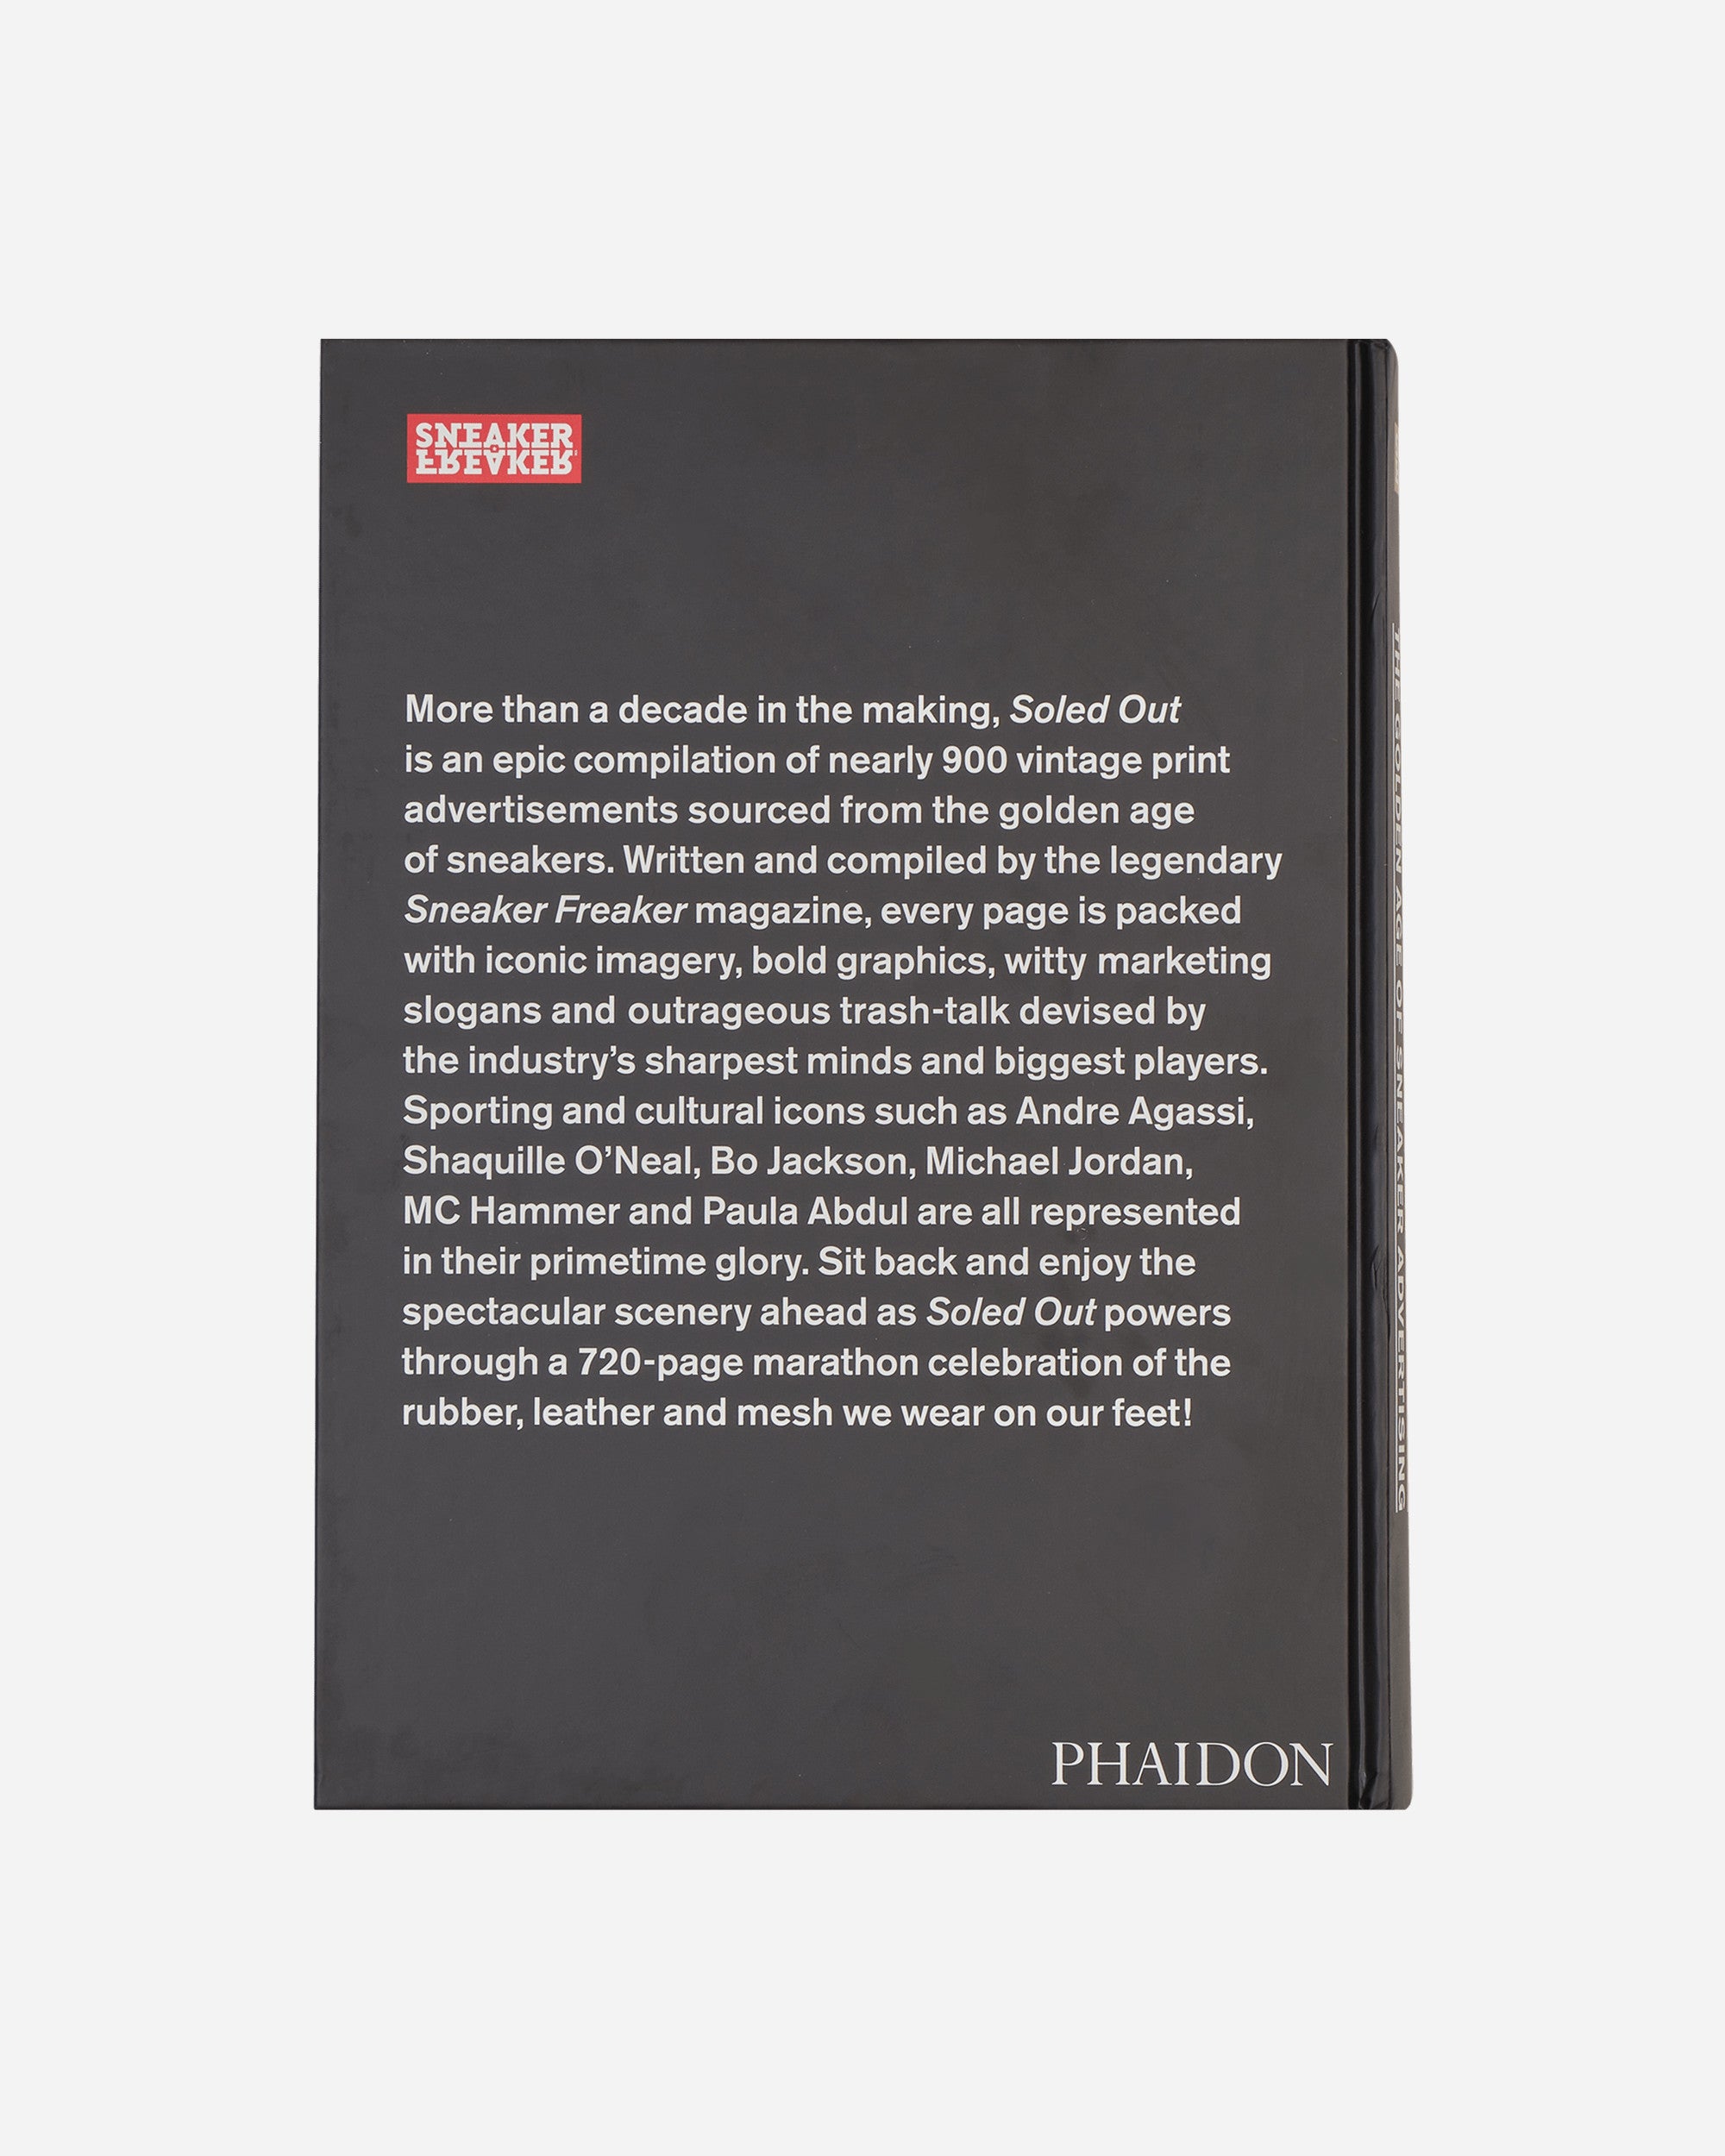 Phaidon Books Soled Out Multi Homeware Books and Magazines 781838663674 MULTI